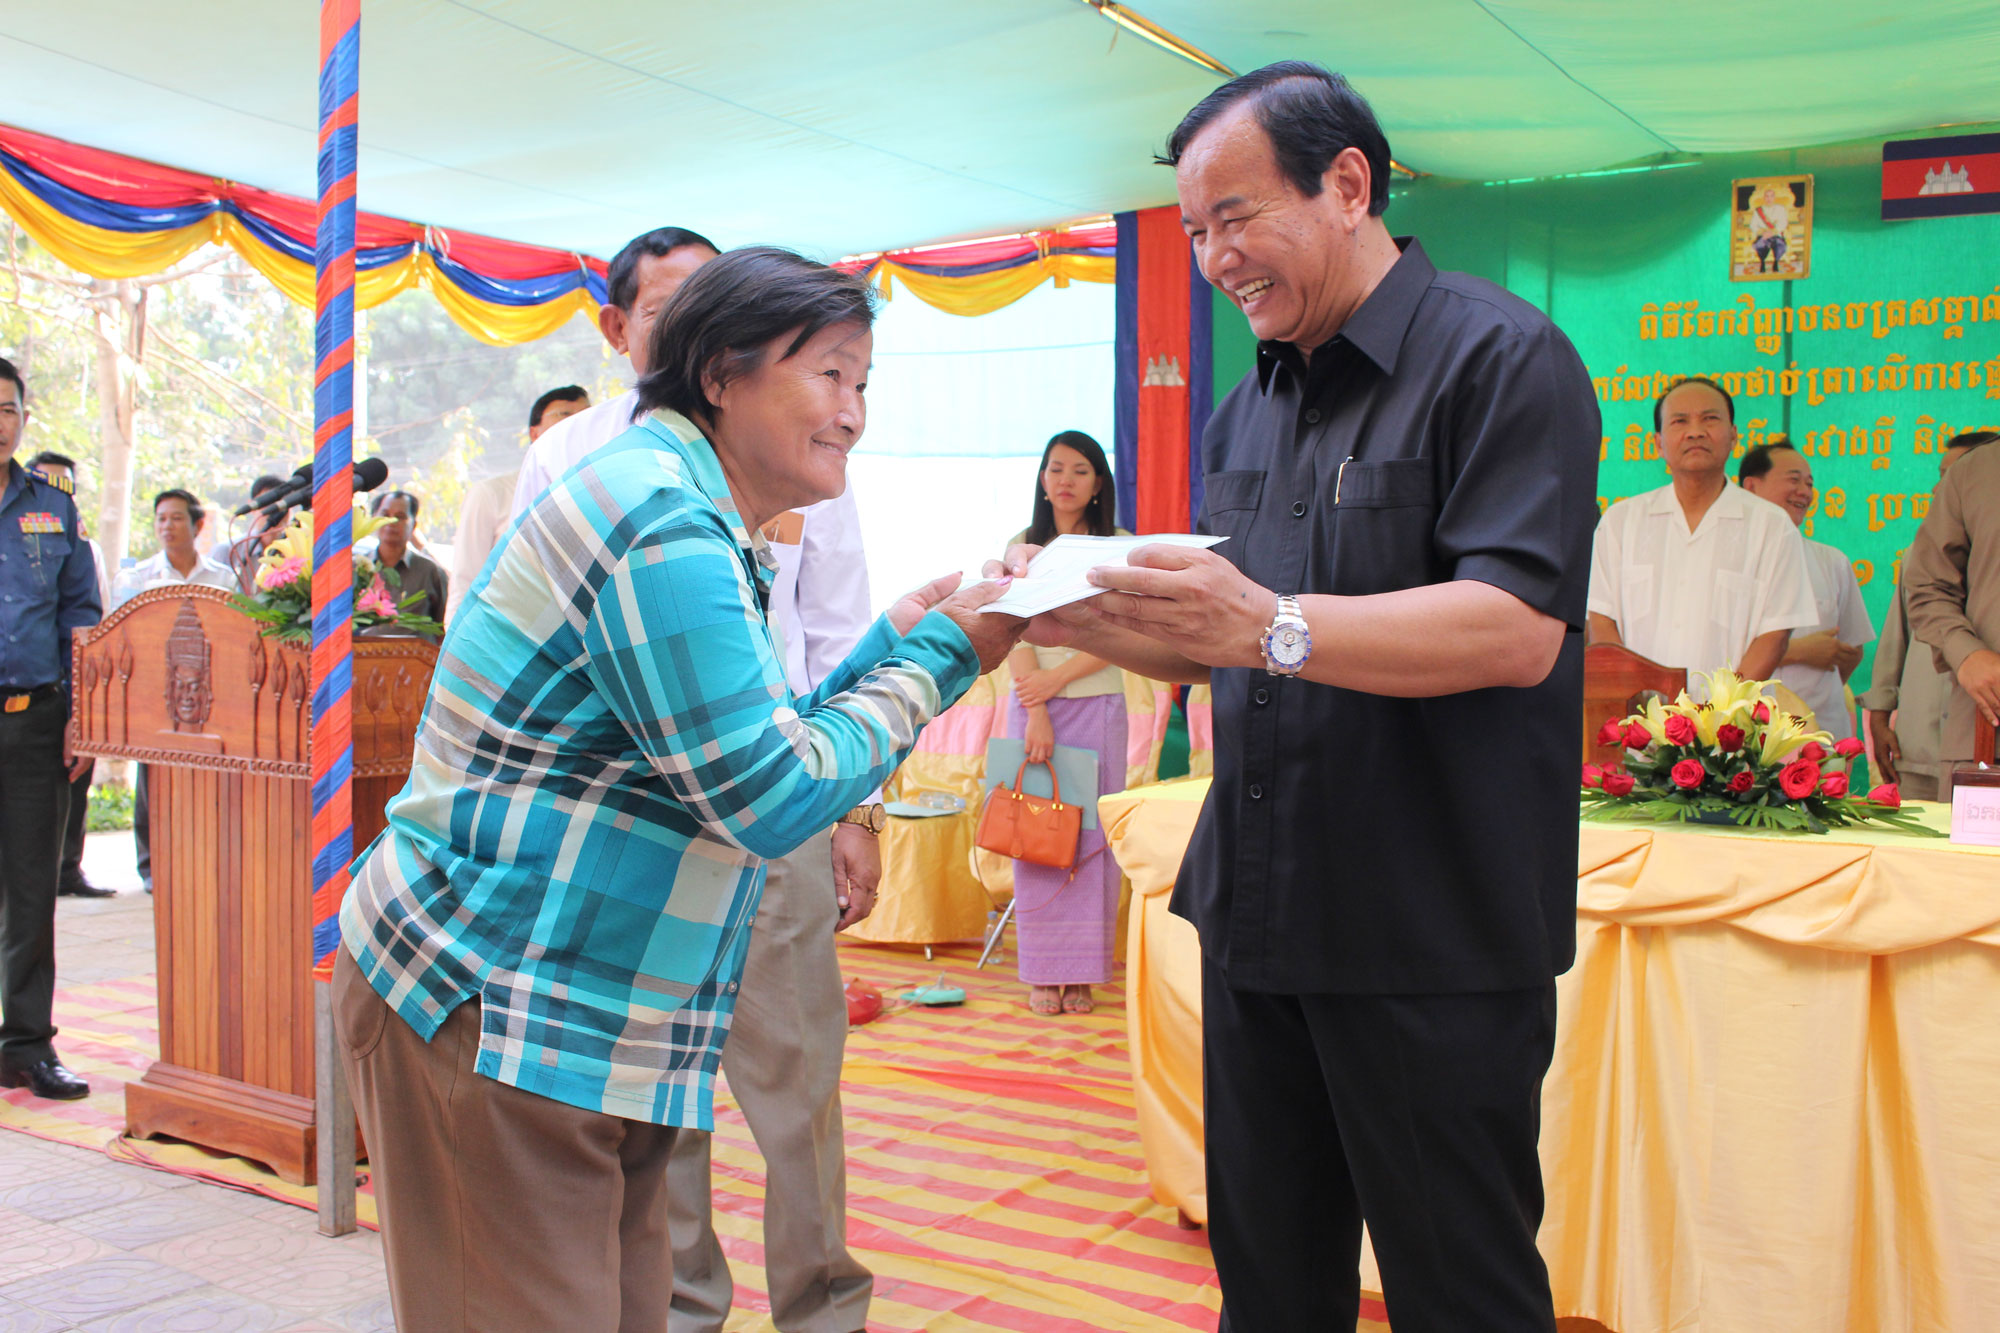 H.E. Minister Prak Sokhonn Presided Over the Handing Over Ceremony of Real Estate Ownership Certificates to Citizen of Saang District. ​